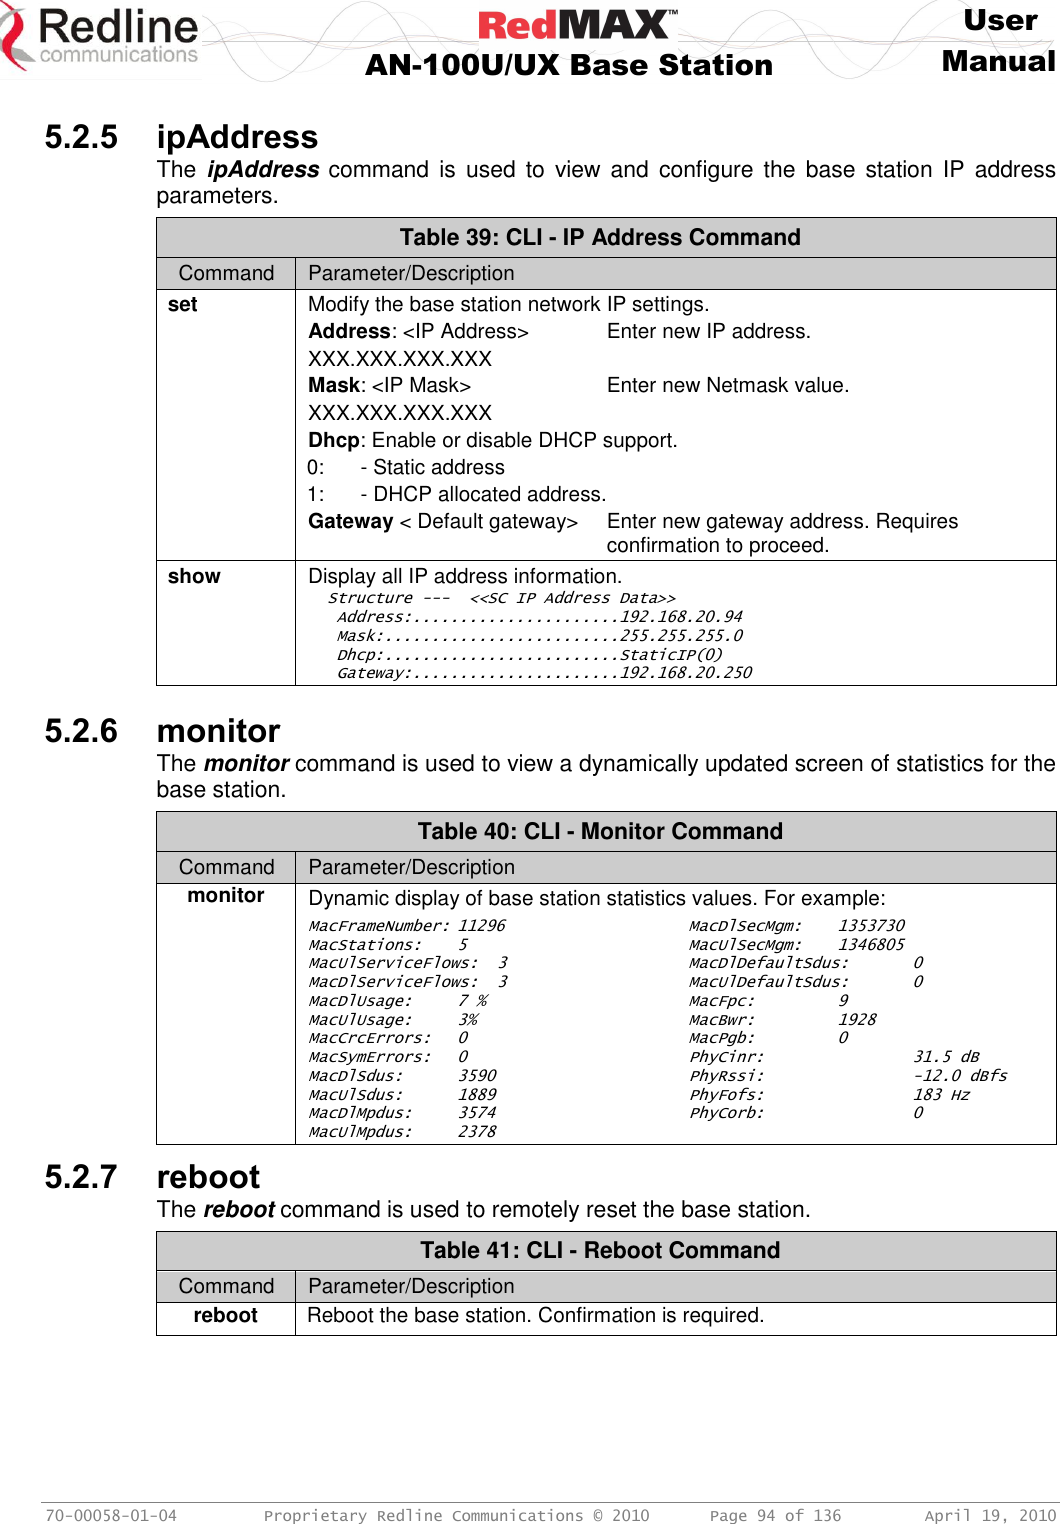     User  AN-100U/UX Base Station Manual   70-00058-01-04  Proprietary Redline Communications © 2010   Page 94 of 136  April 19, 2010  5.2.5 ipAddress The  ipAddress  command  is  used  to  view  and  configure the  base station  IP  address parameters. Table 39: CLI - IP Address Command Command Parameter/Description set Modify the base station network IP settings. Address: &lt;IP Address&gt;   Enter new IP address. XXX.XXX.XXX.XXX Mask: &lt;IP Mask&gt;    Enter new Netmask value. XXX.XXX.XXX.XXX Dhcp: Enable or disable DHCP support. 0:  - Static address 1:  - DHCP allocated address. Gateway &lt; Default gateway&gt;  Enter new gateway address. Requires         confirmation to proceed. show Display all IP address information.   Structure ---  &lt;&lt;SC IP Address Data&gt;&gt;    Address:......................192.168.20.94    Mask:.........................255.255.255.0    Dhcp:.........................StaticIP(0)    Gateway:......................192.168.20.250   5.2.6 monitor The monitor command is used to view a dynamically updated screen of statistics for the base station. Table 40: CLI - Monitor Command Command Parameter/Description monitor Dynamic display of base station statistics values. For example:  MacFrameNumber: 11296 MacStations:  5 MacUlServiceFlows:  3 MacDlServiceFlows:  3 MacDlUsage:   7 % MacUlUsage:  3% MacCrcErrors:  0 MacSymErrors:  0 MacDlSdus:  3590 MacUlSdus:   1889 MacDlMpdus:  3574 MacUlMpdus:  2378 MacDlSecMgm:  1353730  MacUlSecMgm:   1346805 MacDlDefaultSdus:  0 MacUlDefaultSdus:  0 MacFpc:   9 MacBwr:   1928 MacPgb:   0 PhyCinr:    31.5 dB PhyRssi:    -12.0 dBfs PhyFofs:    183 Hz PhyCorb:    0 5.2.7 reboot The reboot command is used to remotely reset the base station. Table 41: CLI - Reboot Command Command Parameter/Description reboot Reboot the base station. Confirmation is required.  